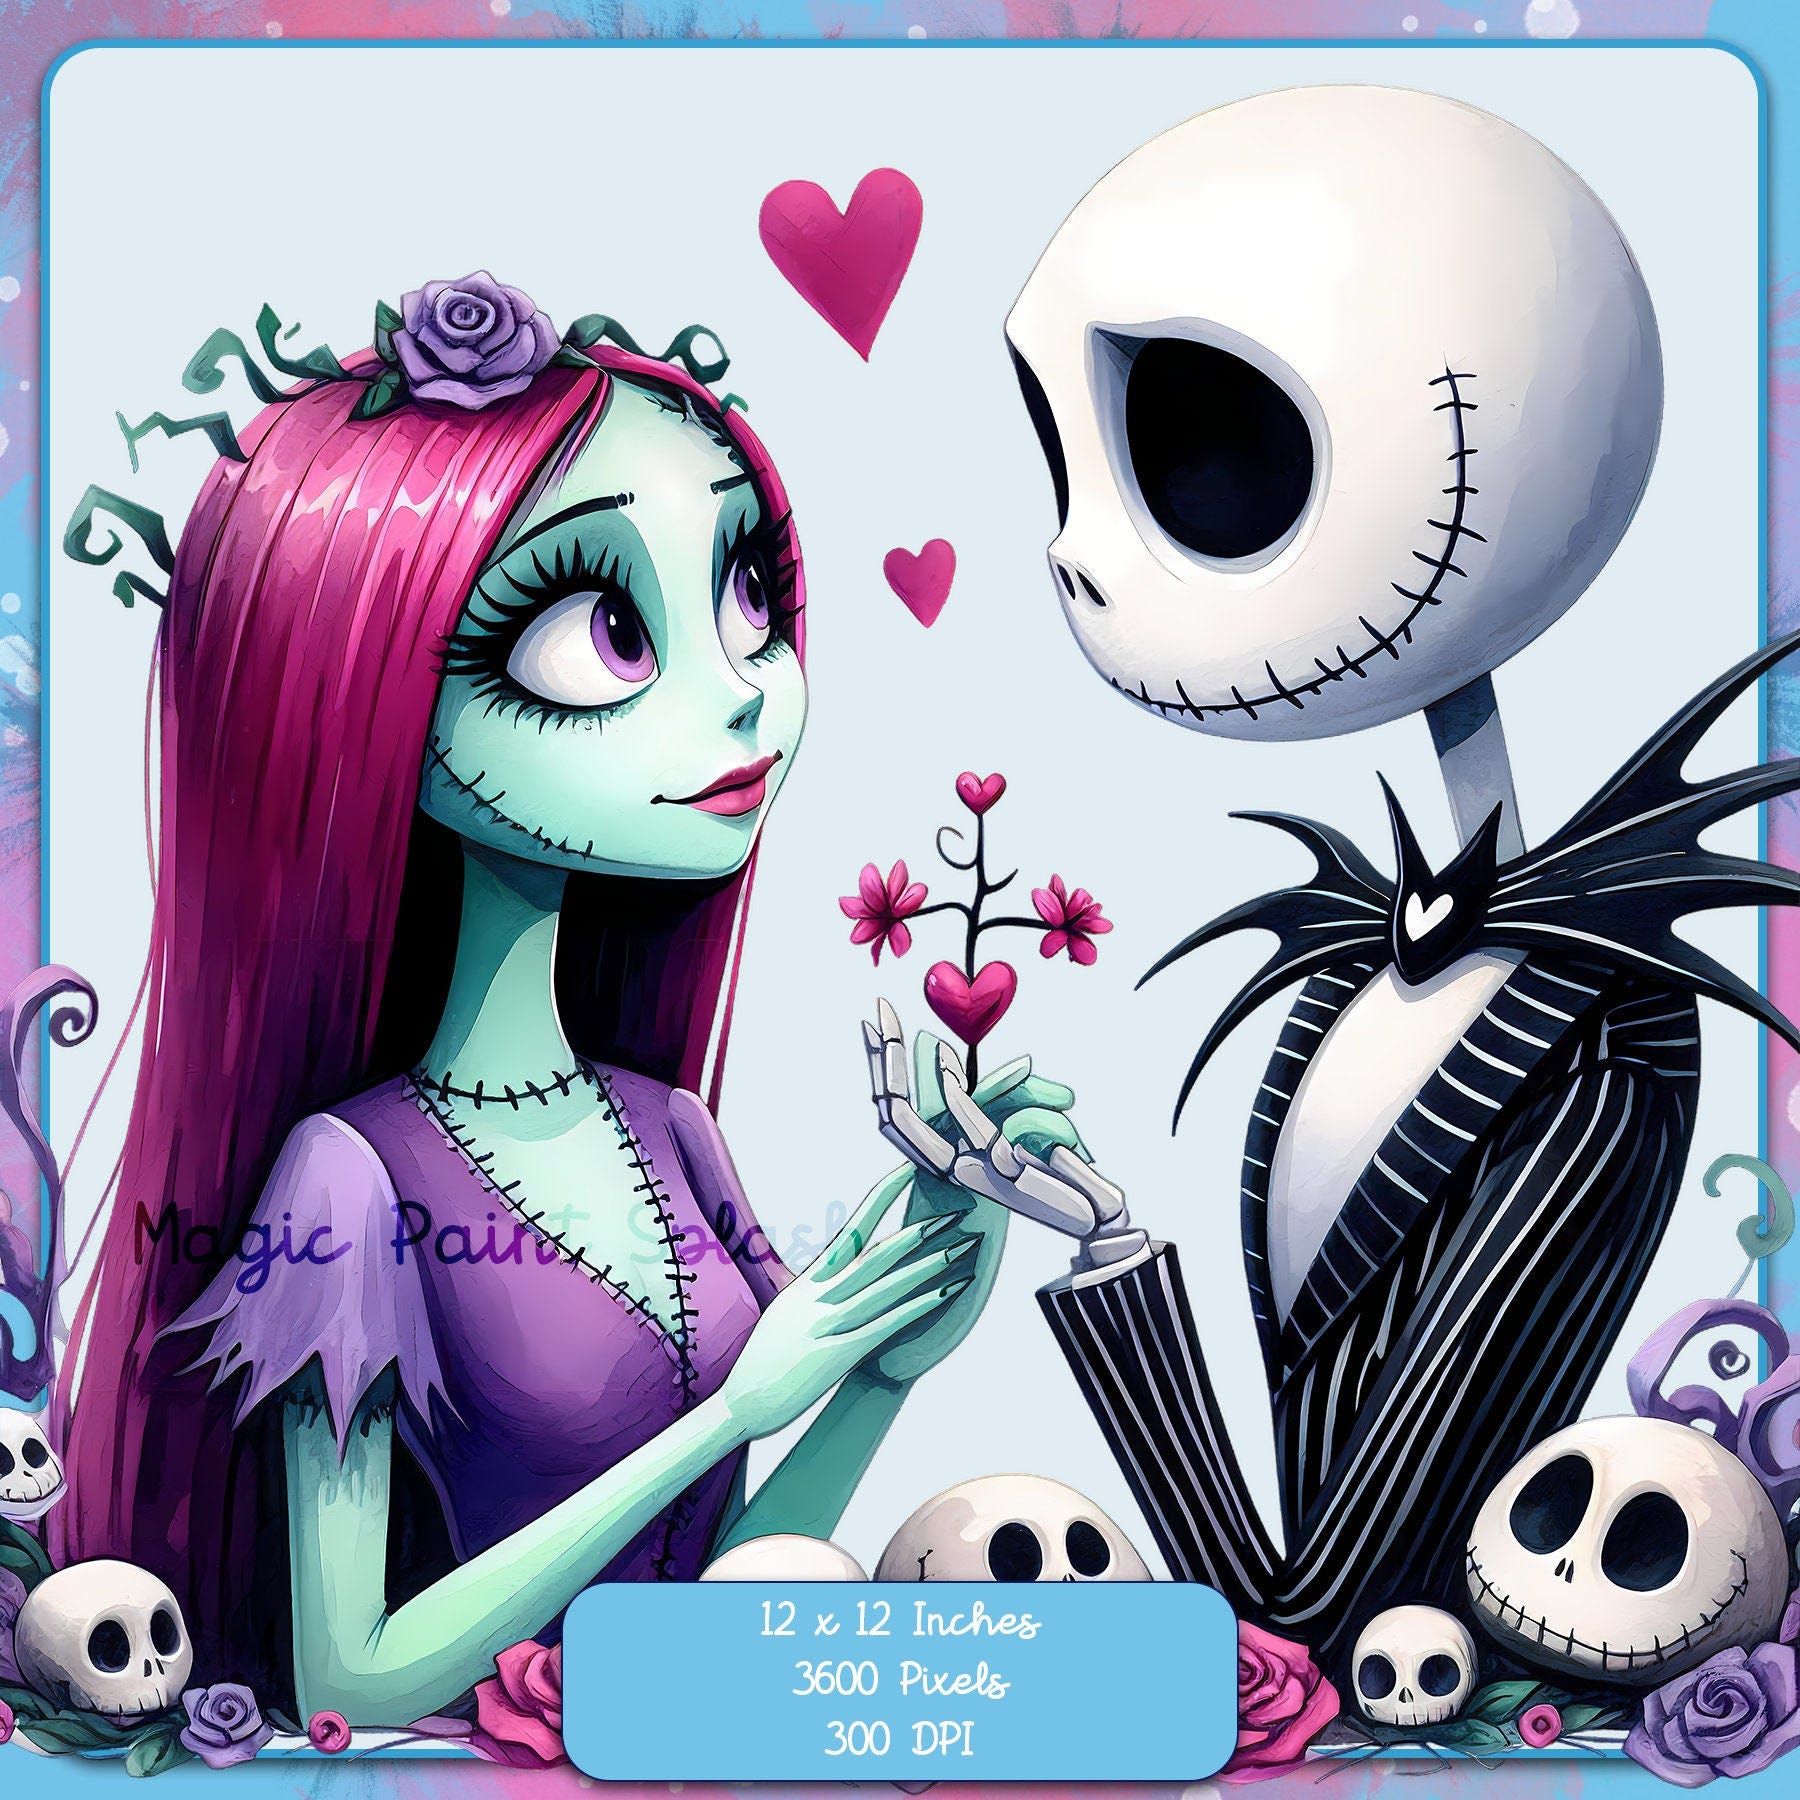 Jack and Sally PNG Image, Clipart Images, Graphics and Artwork, Rainbow Aesthetic, PNG Christmas Nightmare Images